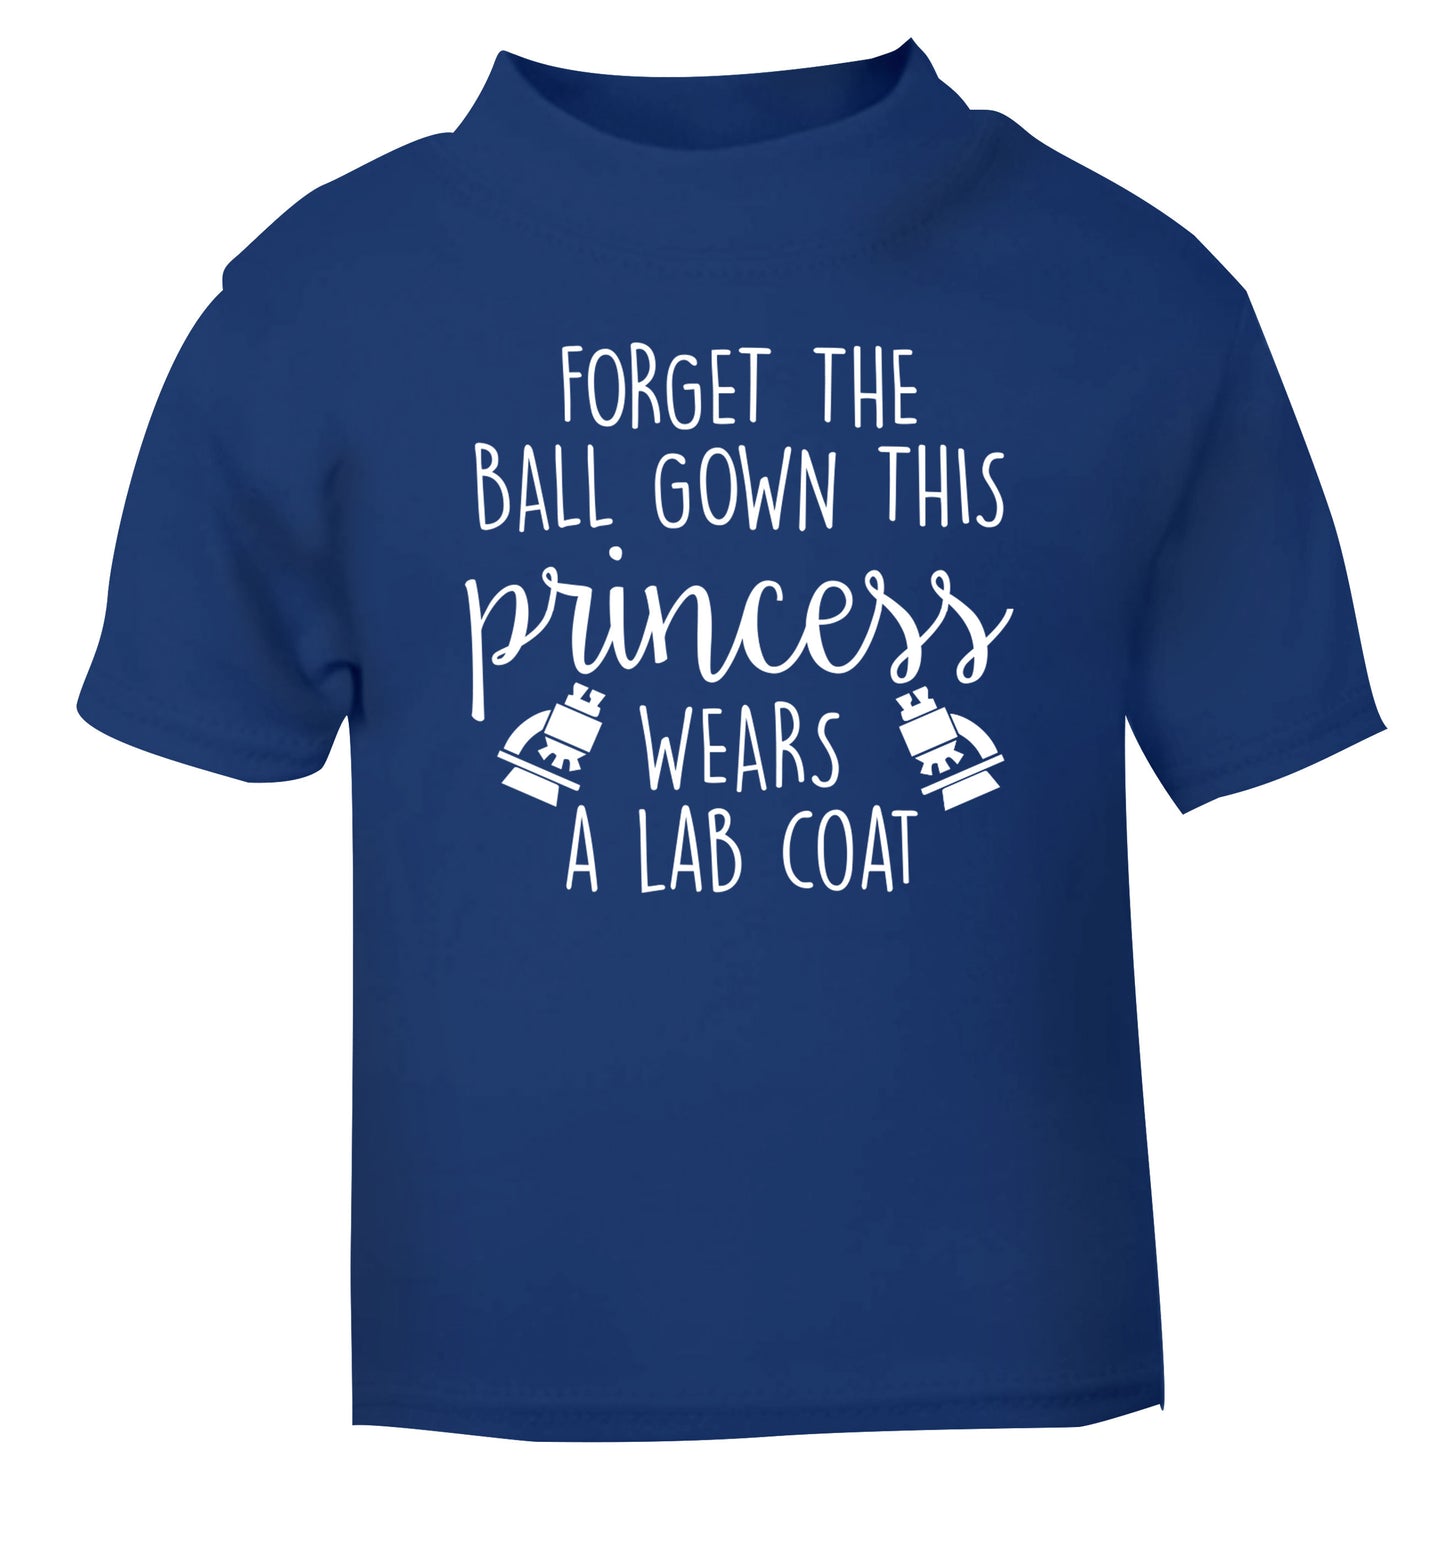 Forget the ball gown this princess wears a lab coat blue Baby Toddler Tshirt 2 Years